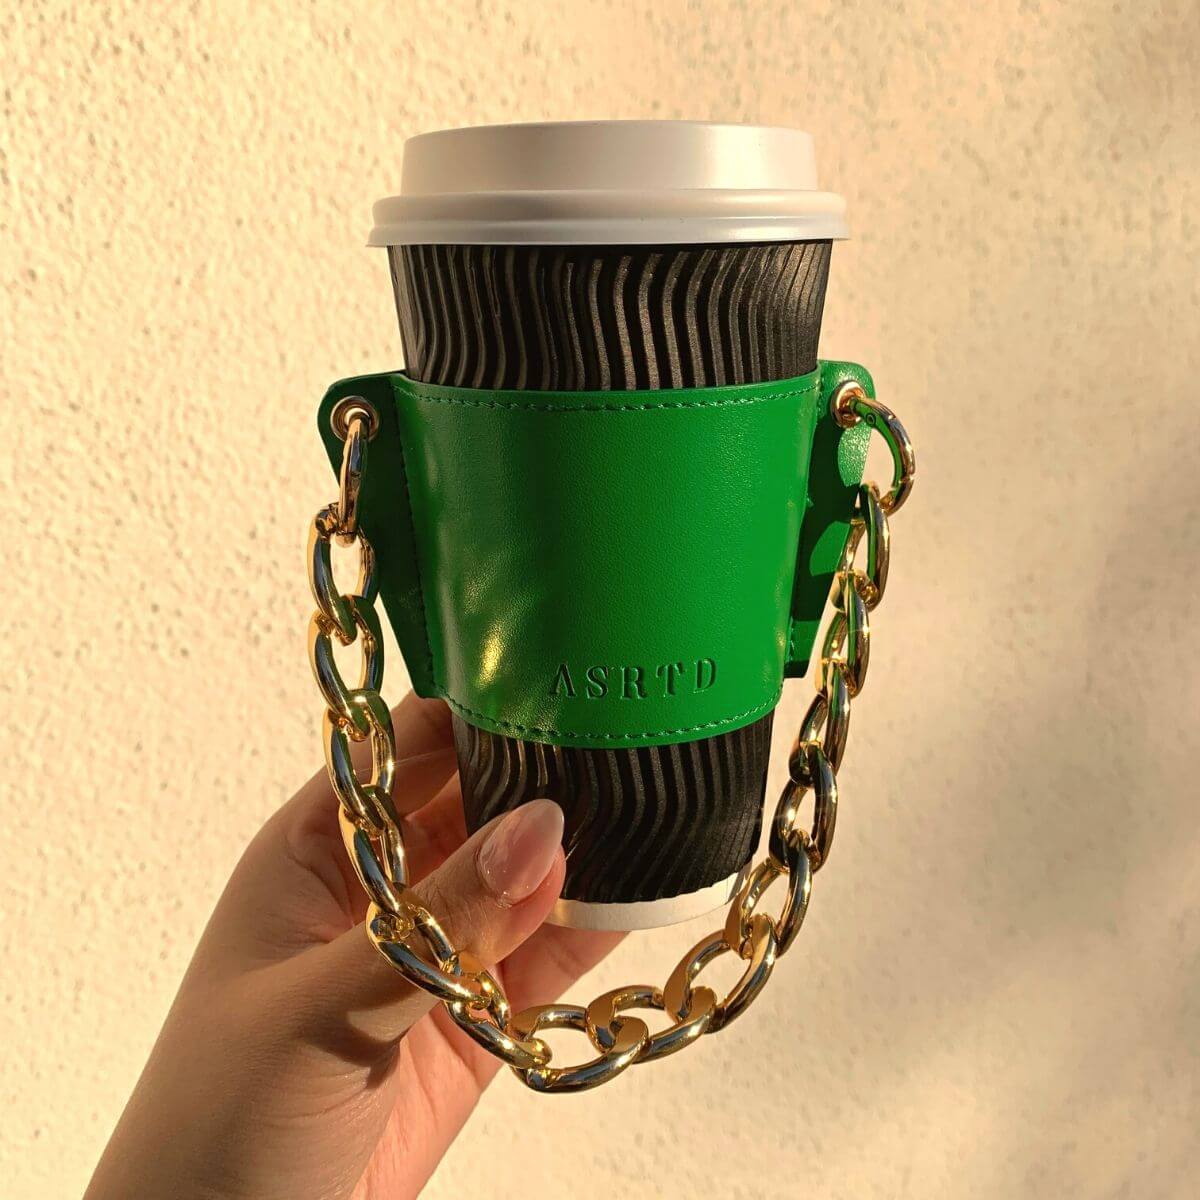 Reusable-Cup-Sleeve-Green-Vegan-Leather-Gold-Chain-Holding